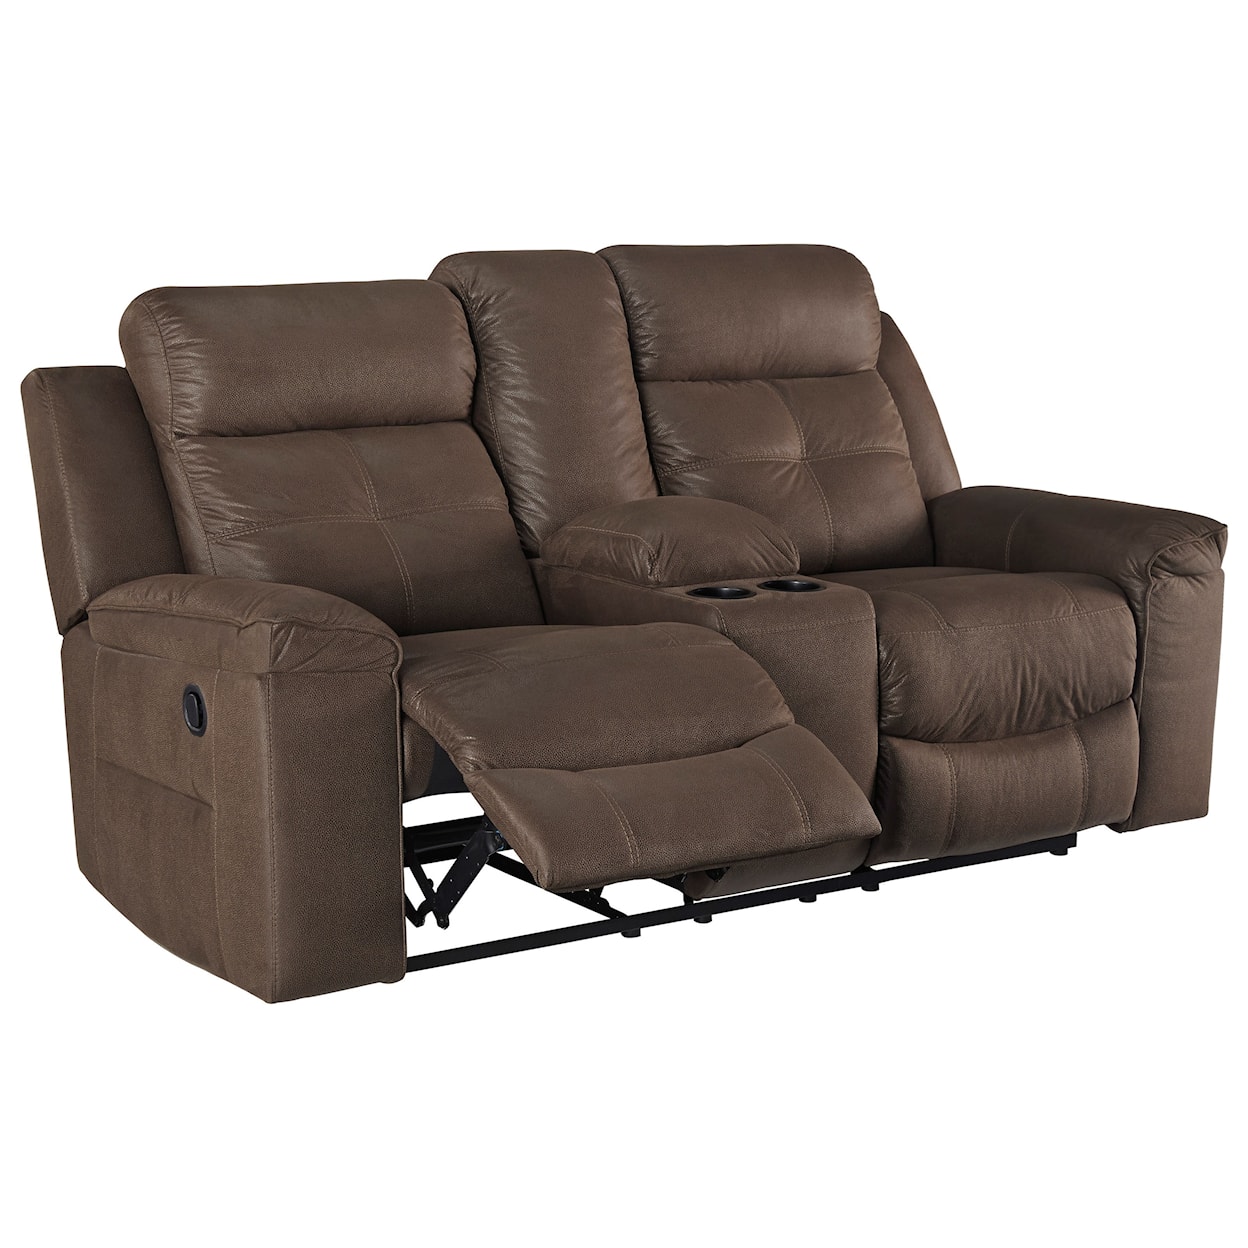 Ashley Signature Design Jesolo Double Reclining Loveseat with Console